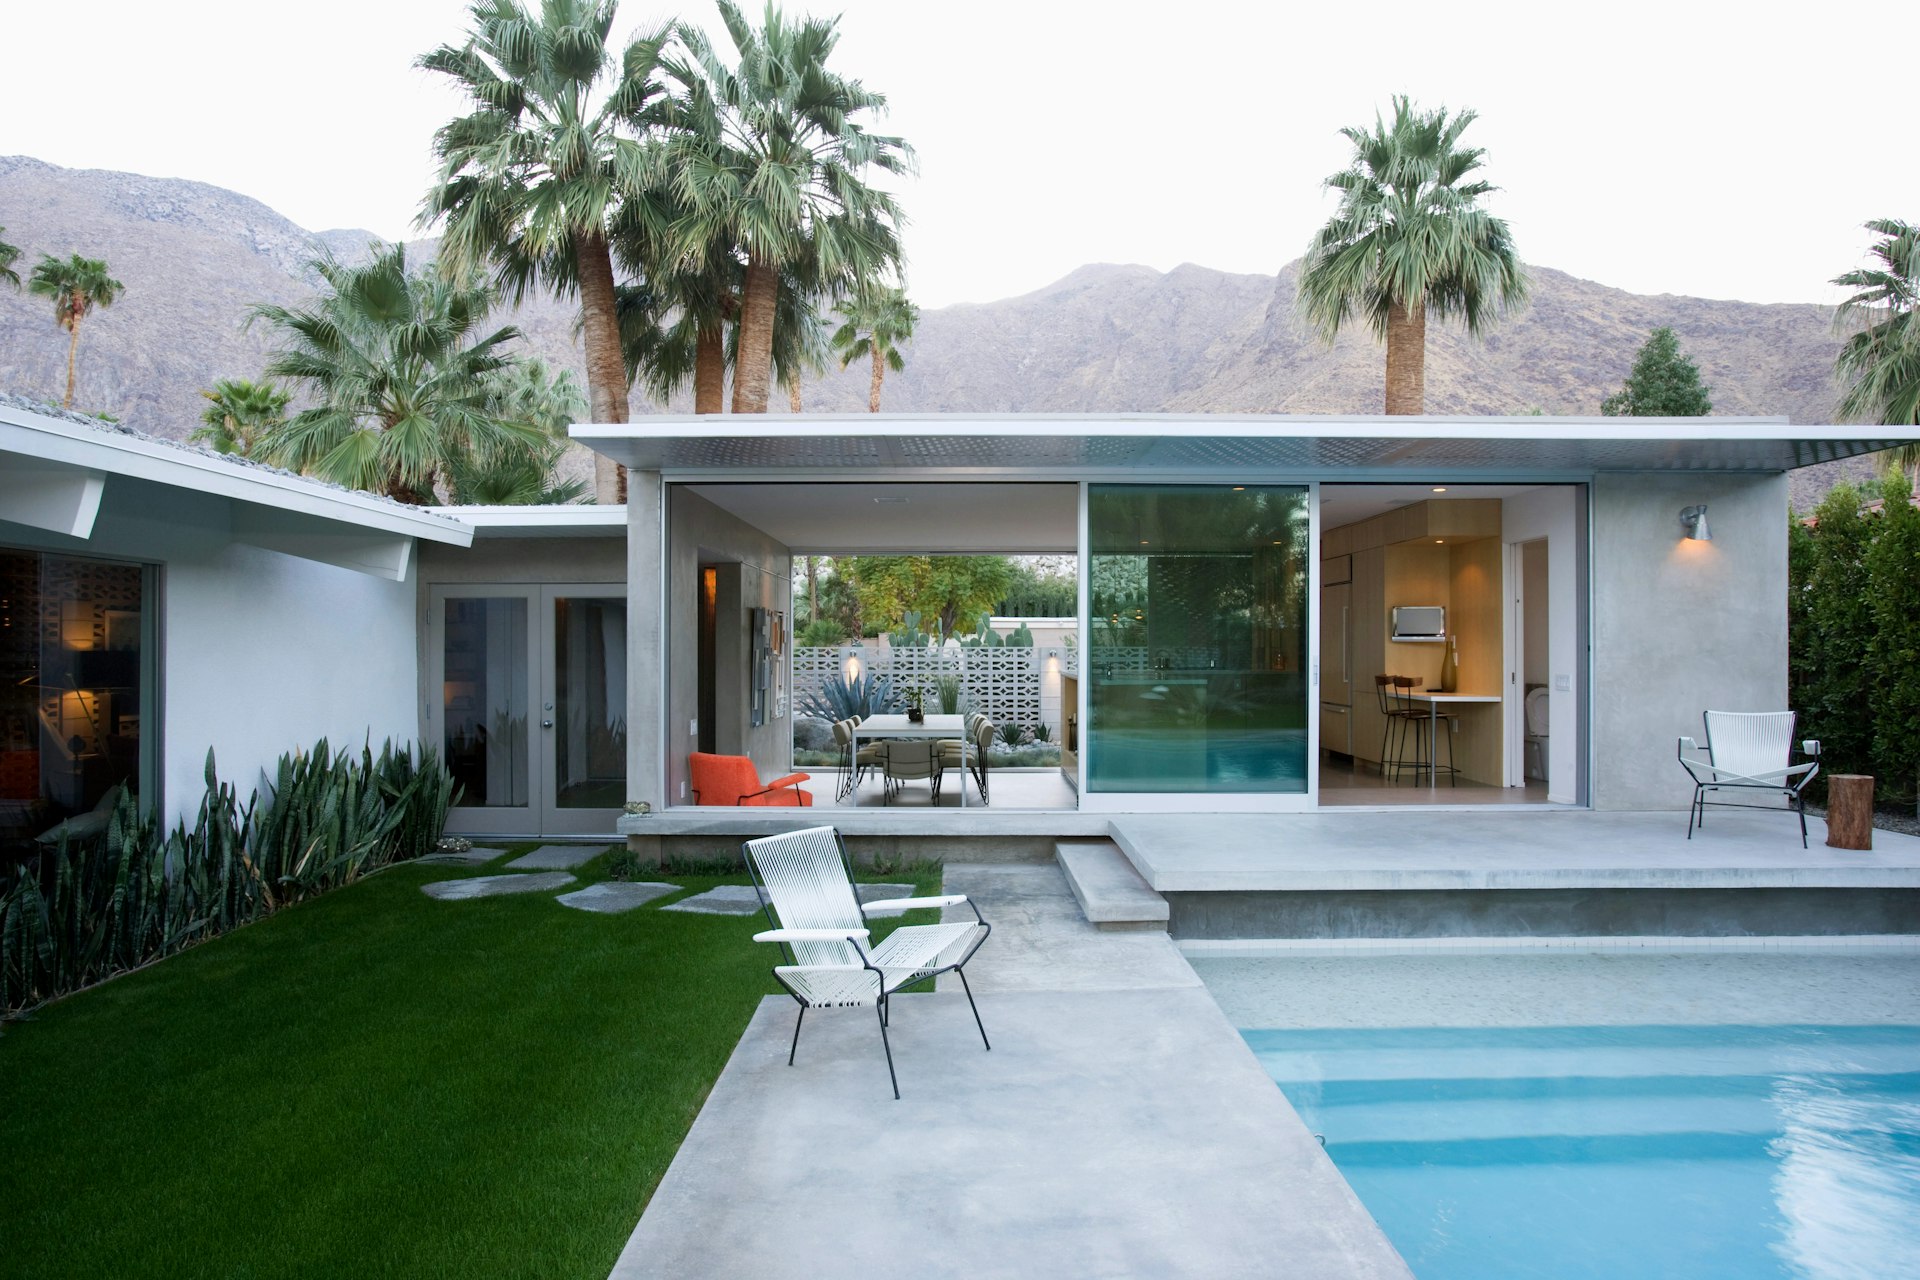 If Palm Springs' architecture isn't cool enough, you can always take a dip in the pool © Moodboard Getty Images